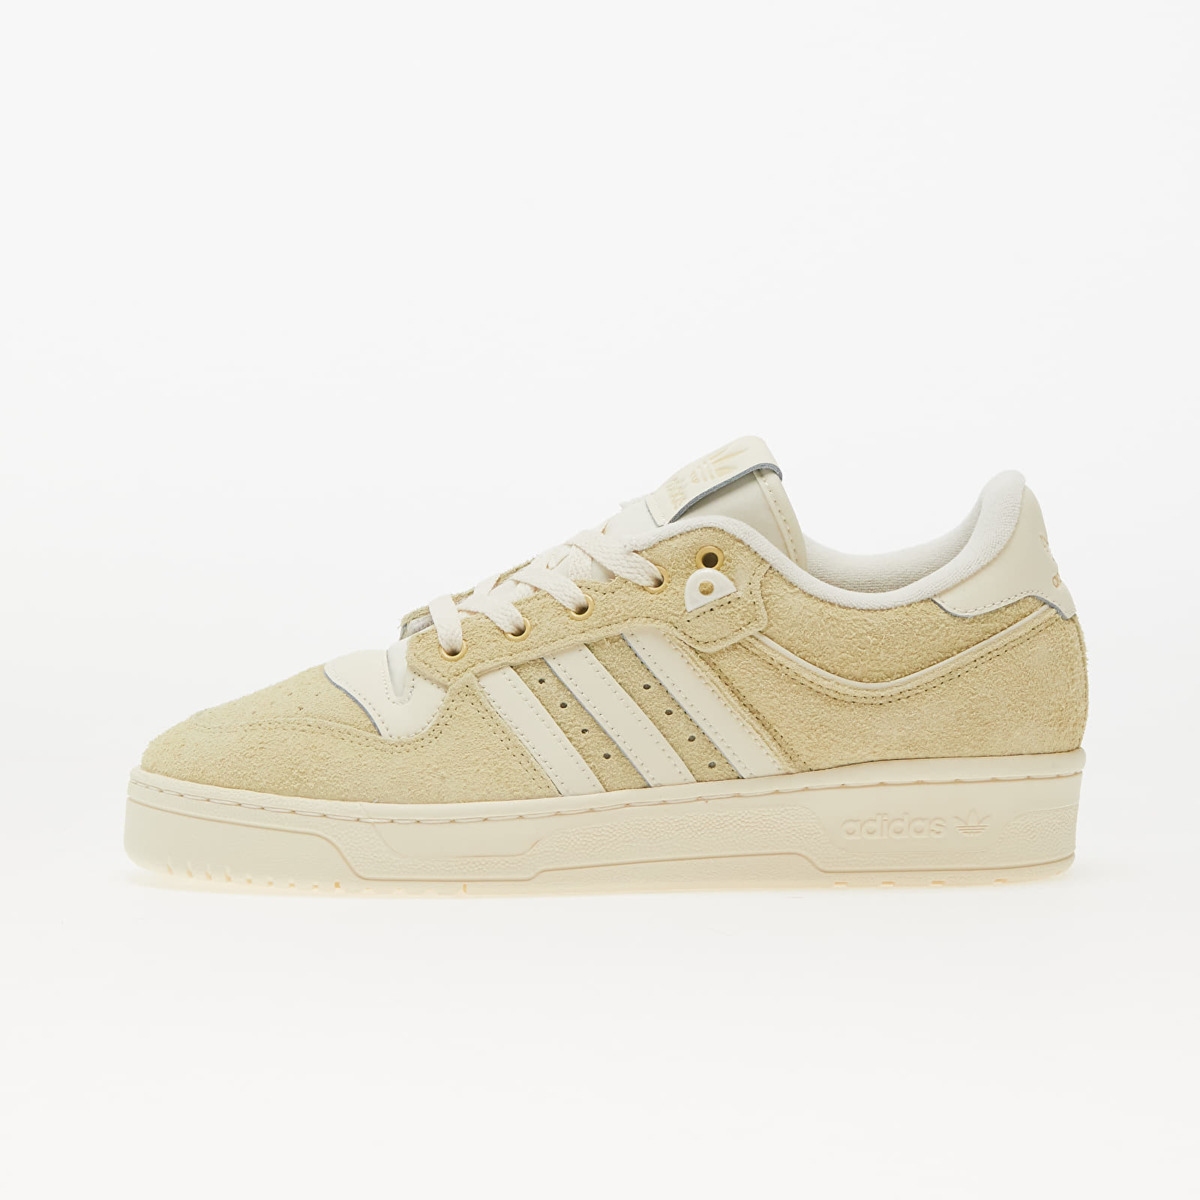 Adidas - Rivalry in White from Footshop GOOFASH